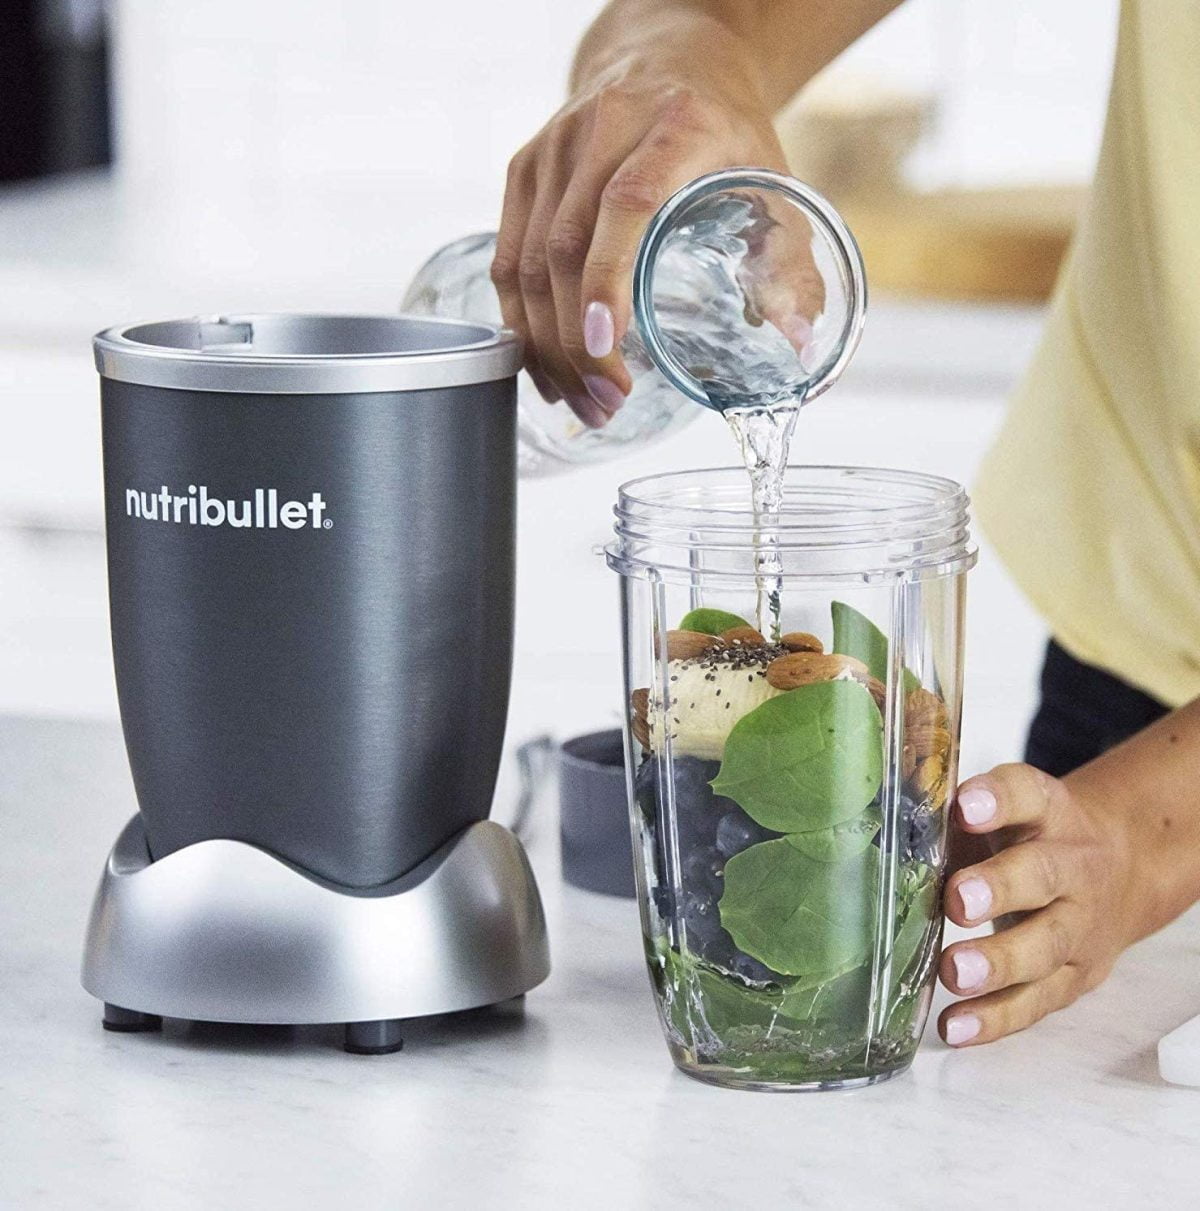 81Rjehjupol. Ac Sl1492 &Lt;Ul Class=&Quot;A-Unordered-List A-Vertical A-Spacing-Mini&Quot;&Gt; &Lt;Li&Gt;&Lt;Span Class=&Quot;A-List-Item&Quot;&Gt;Meet The Most Popular Nutribullet, Our Compact-Yet-Powerful Personal Blender. You Choose What Goes In To Get The Most Out Of Every Ingredient, Every Day.&Lt;/Span&Gt;&Lt;/Li&Gt; &Lt;Li&Gt;&Lt;Span Class=&Quot;A-List-Item&Quot;&Gt;The Nutribullet Is The Fastest, Easiest Solution For Making Nutrient-Packed Smoothies. Load It Up With Your Favorite Whole Foods Like Nuts, Berries, And Spinach, Then Push, Twist, And Blend Your Way To A Healthier Lifestyle.&Lt;/Span&Gt;&Lt;/Li&Gt; &Lt;Li&Gt;&Lt;Span Class=&Quot;A-List-Item&Quot;&Gt;Powerful 600-Watt Motor And Refined Nutrient-Extraction Blades Blend Whole Foods Into Liquid Fuel For Your Body - In Seconds.&Lt;/Span&Gt;&Lt;/Li&Gt; &Lt;Li&Gt;&Lt;Span Class=&Quot;A-List-Item&Quot;&Gt;Hassle-Free Cleaning - Simply Twist Off The Blade, Rinse With Soap And Water, And Put The Cups In The Top Rack Of The Dishwasher.&Lt;/Span&Gt;&Lt;/Li&Gt; &Lt;Li&Gt;&Lt;Span Class=&Quot;A-List-Item&Quot;&Gt;What You Get: (1) 600 Watt Motor Base, (1) Extractor Blade, (1) 700Ml Cup, (1) 500Ml Cup, (1) Lip Ring With Handle, (1) Solid Lid, (1) User Guide, (1) Recipe Book. 2 Years Brand Warranty&Lt;/Span&Gt;&Lt;/Li&Gt; &Lt;/Ul&Gt; Nutribullet Nutribullet 600 Watts, 8 Piece Set, Multi-Function High Speed Blender, Mixer System With Nutrient Extractor, Smoothie Maker, Gray